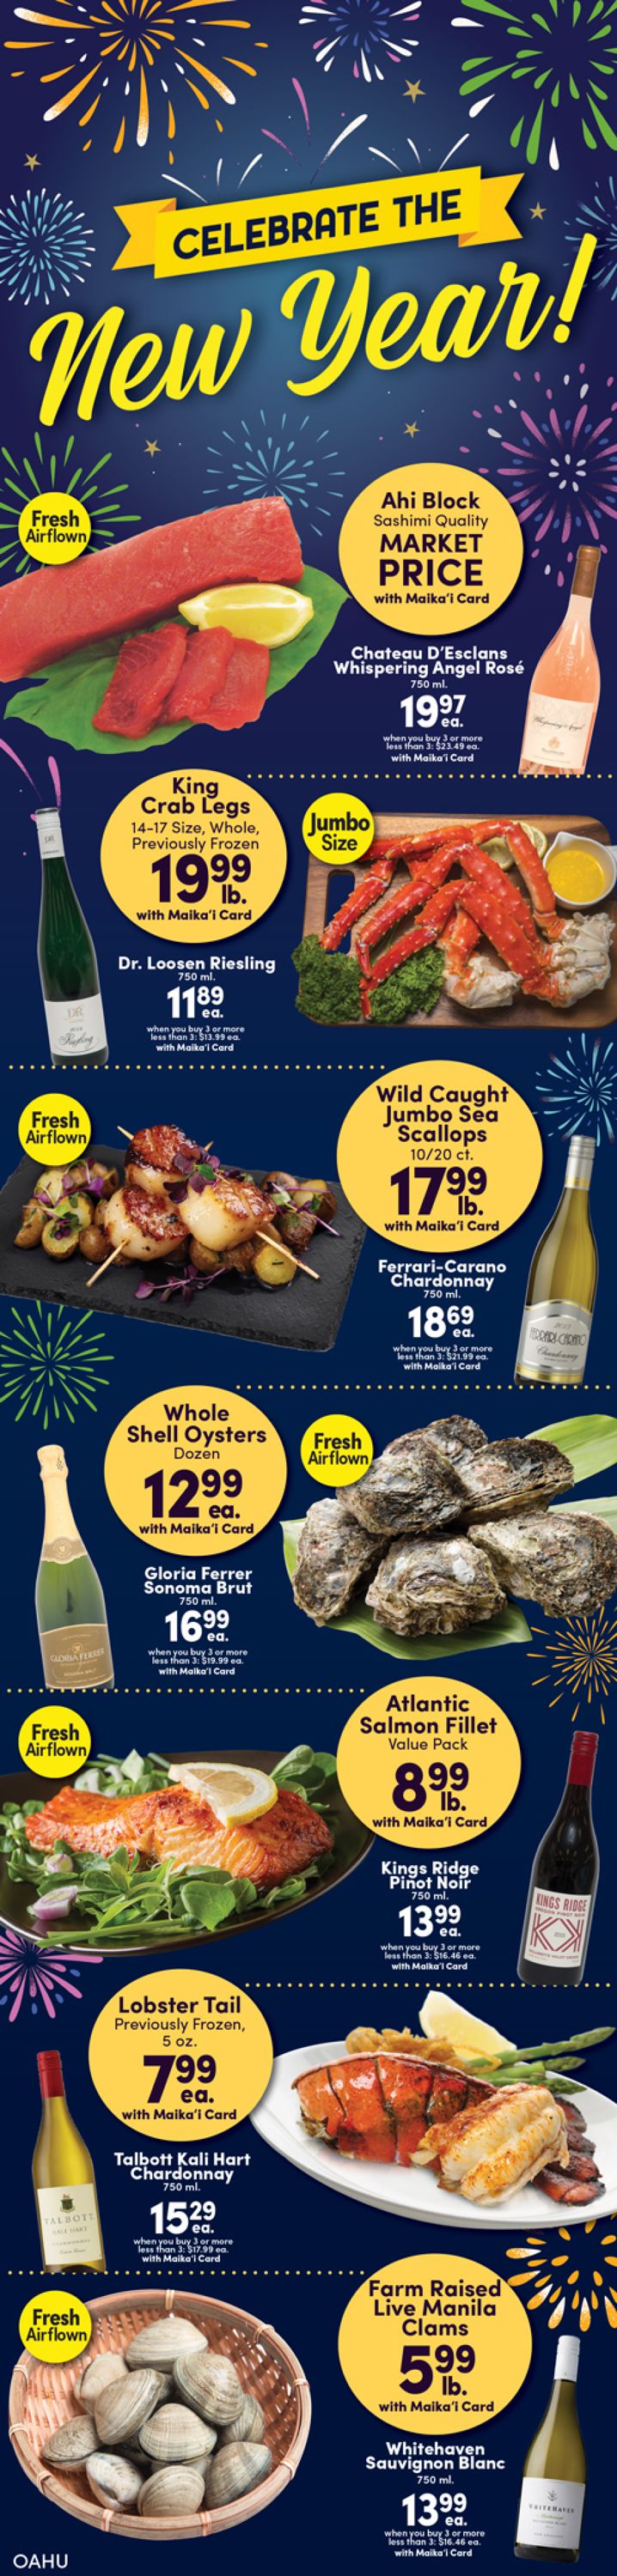 Catalogue Foodland - New Year's Ad 2019/2020 from 12/26/2019